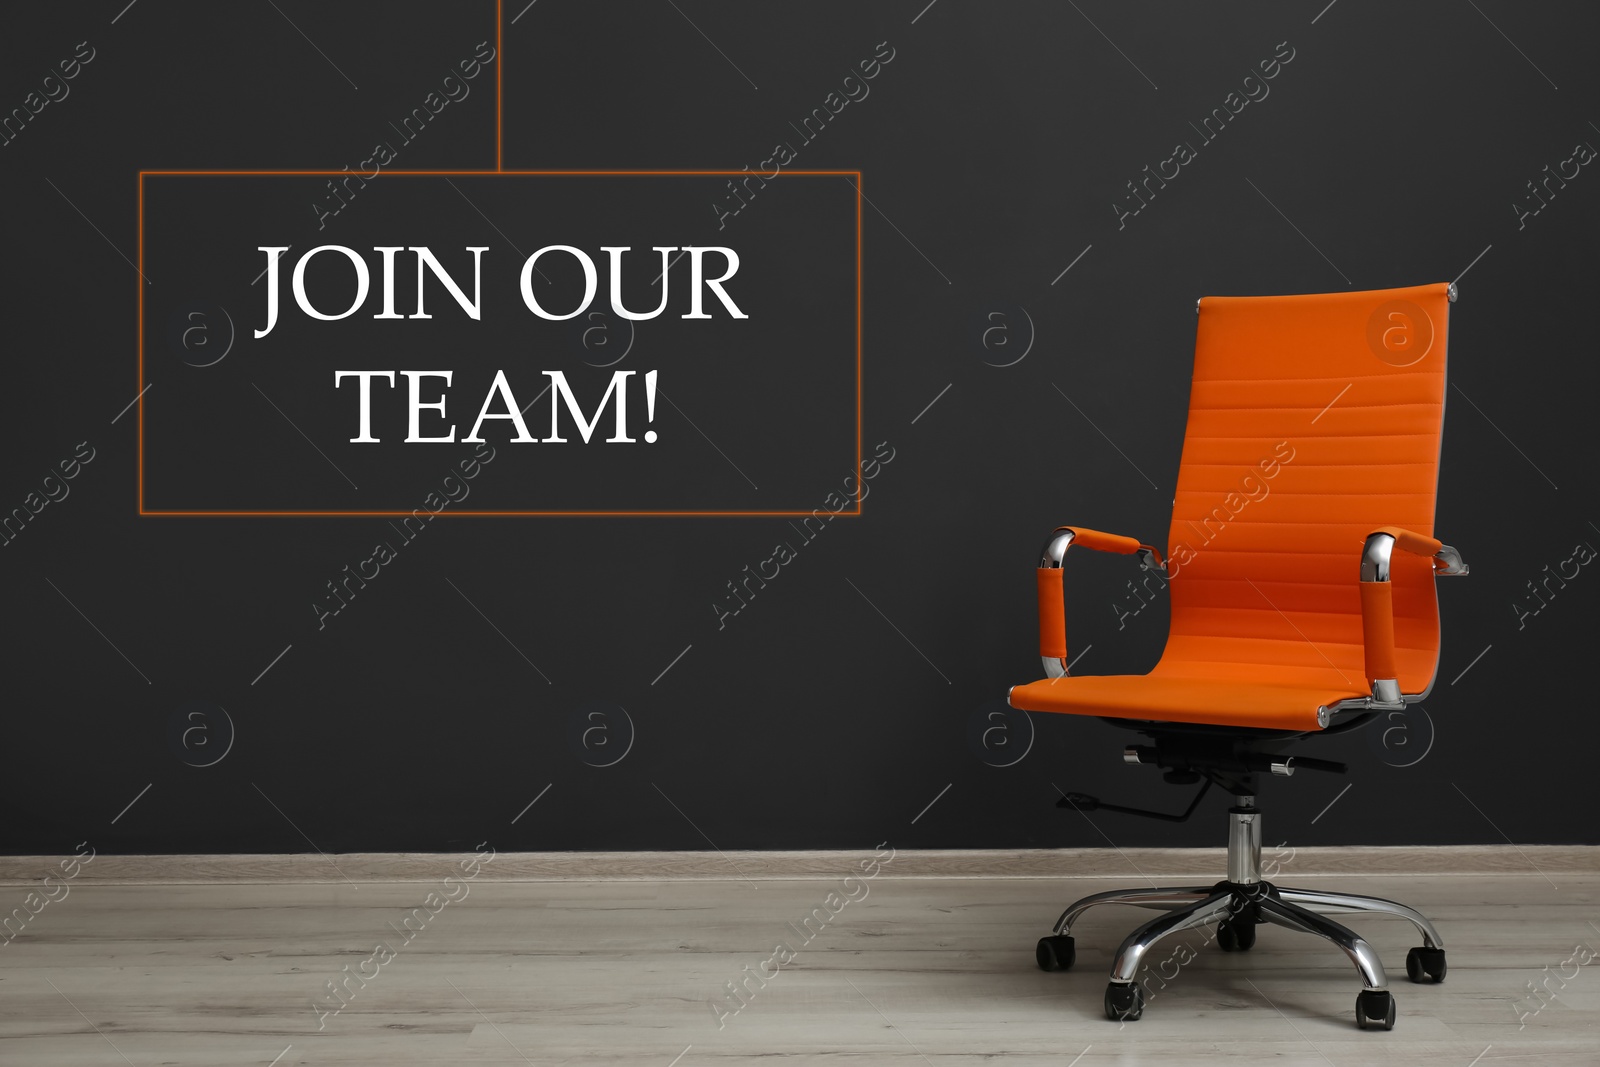 Image of Join our team! Orange office chair near black wall indoors